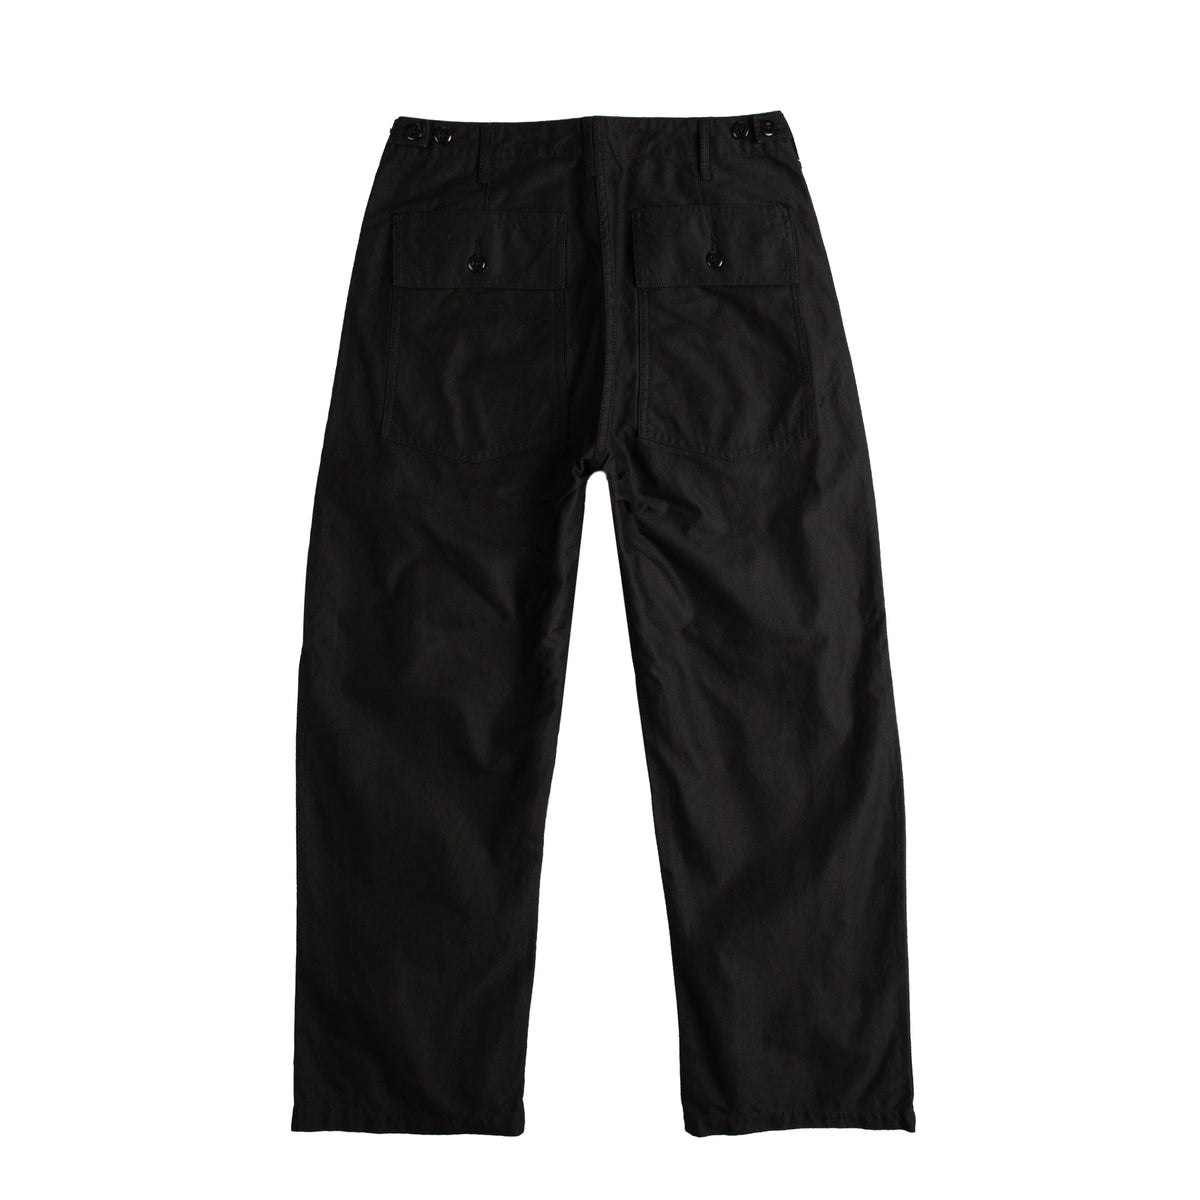 Beams Plus Military Utility Trousers – buy now at Asphaltgold Online Store!